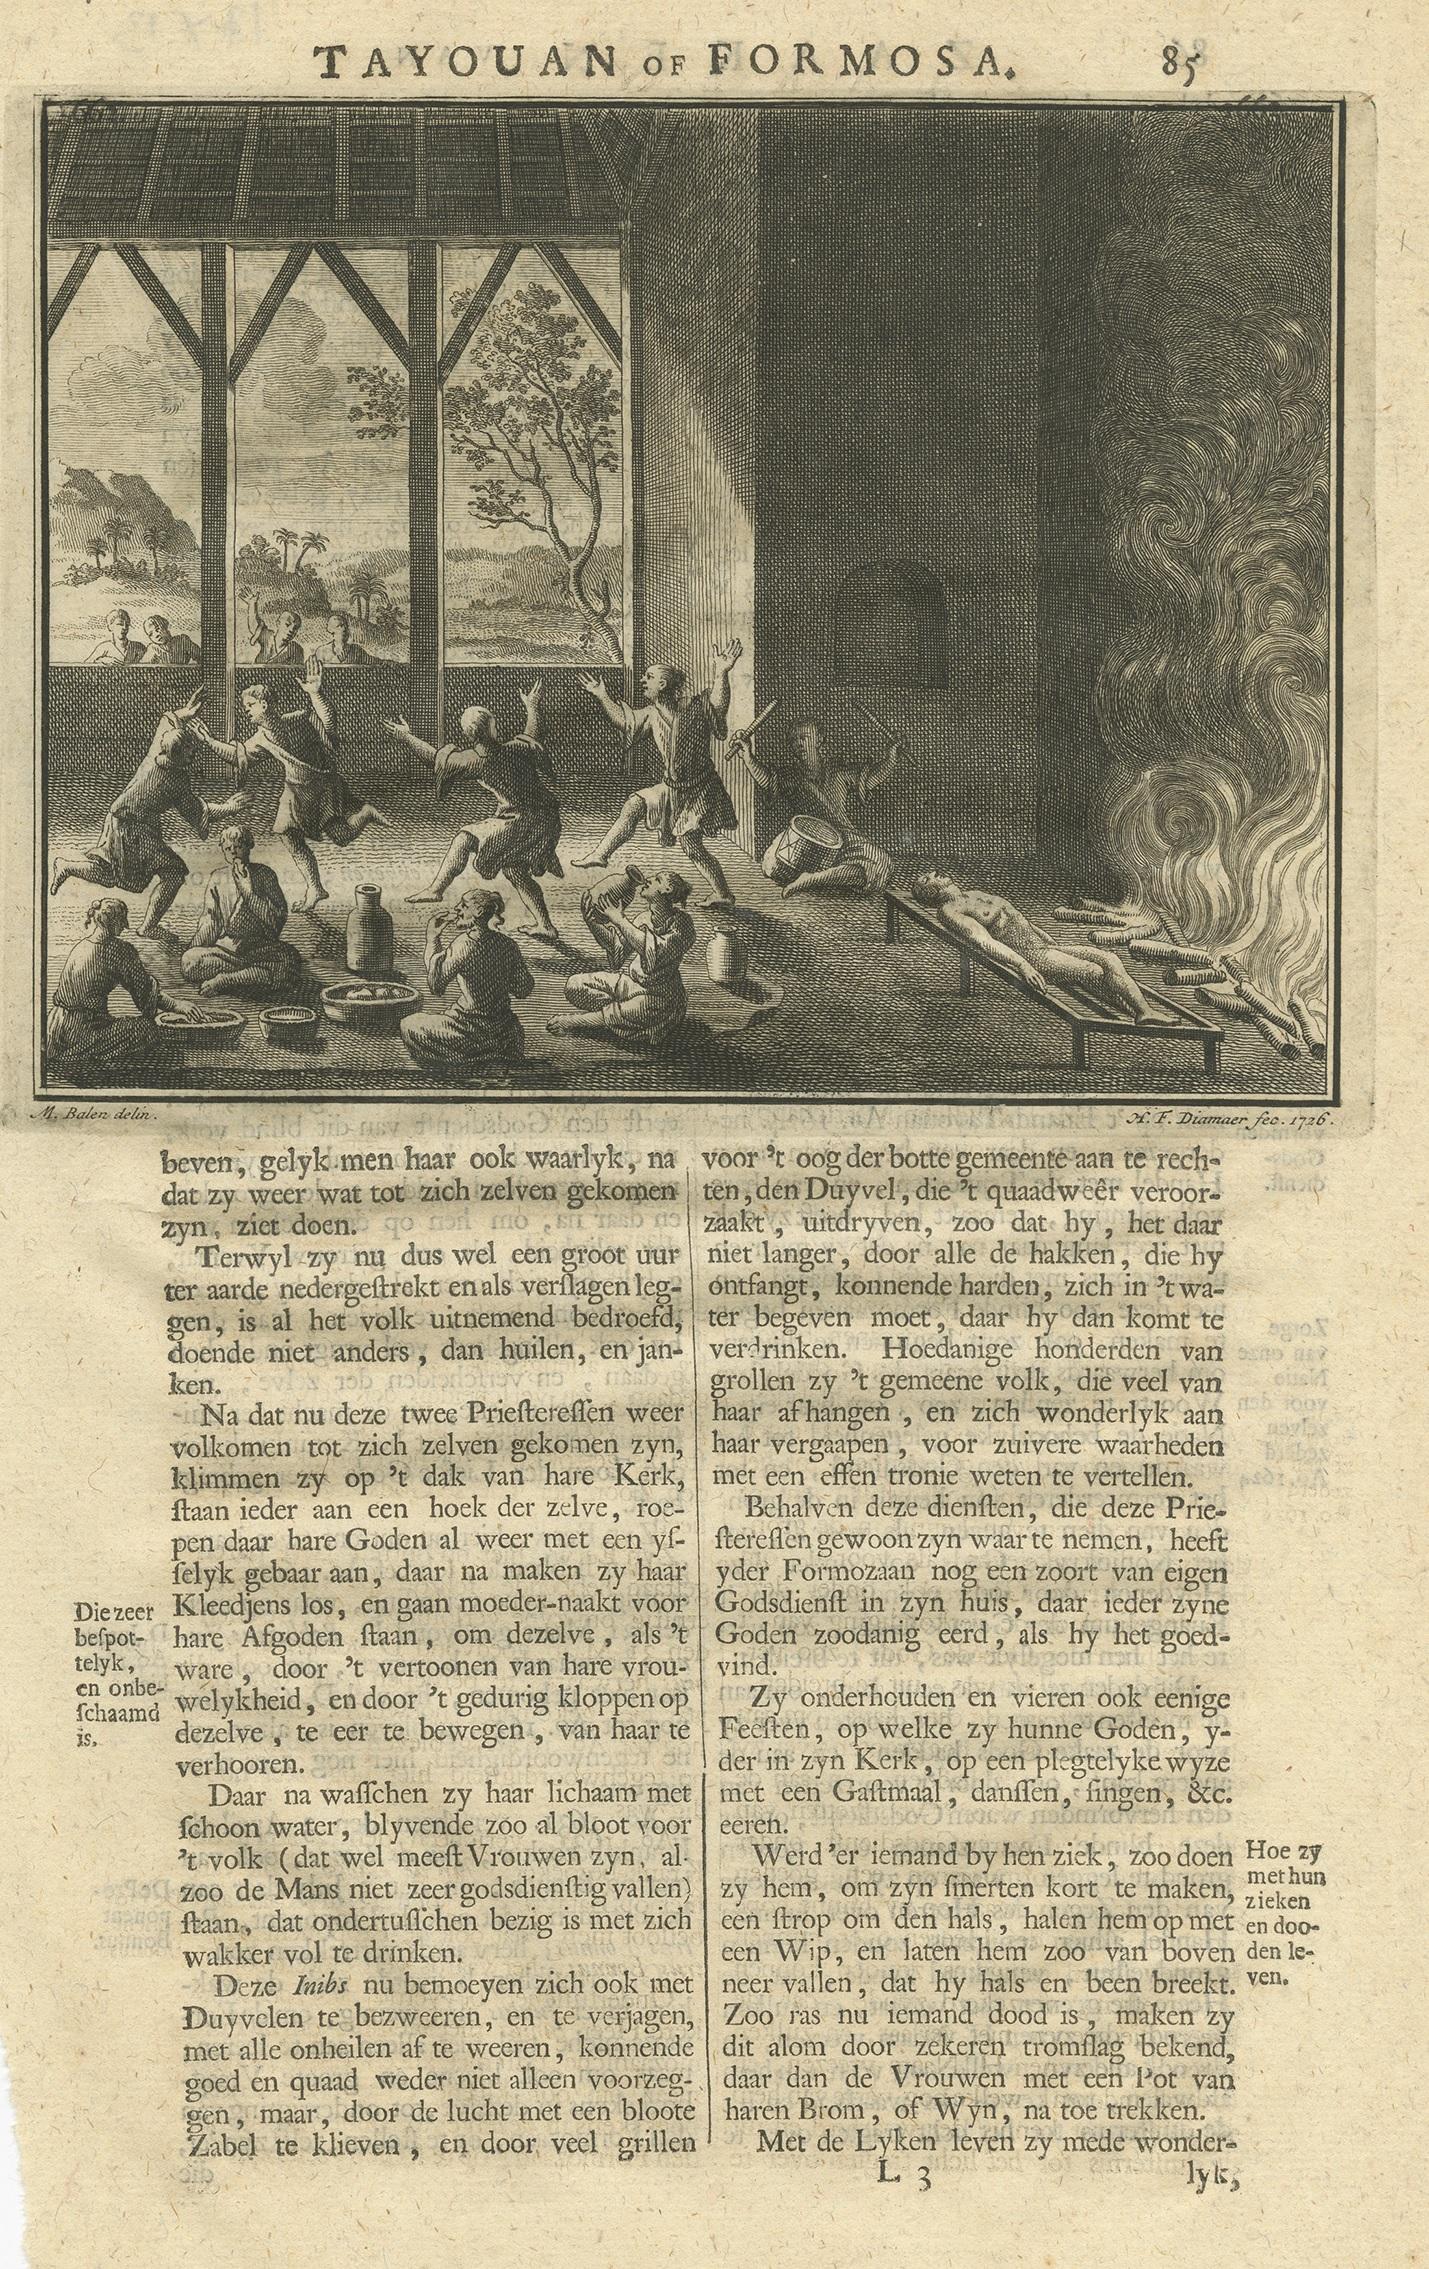 Untitled print of a ritual on Formosa / Taiwan. Text on verso. This print originates from 'Oud en Nieuw Oost-Indiën' by F. Valentijn.